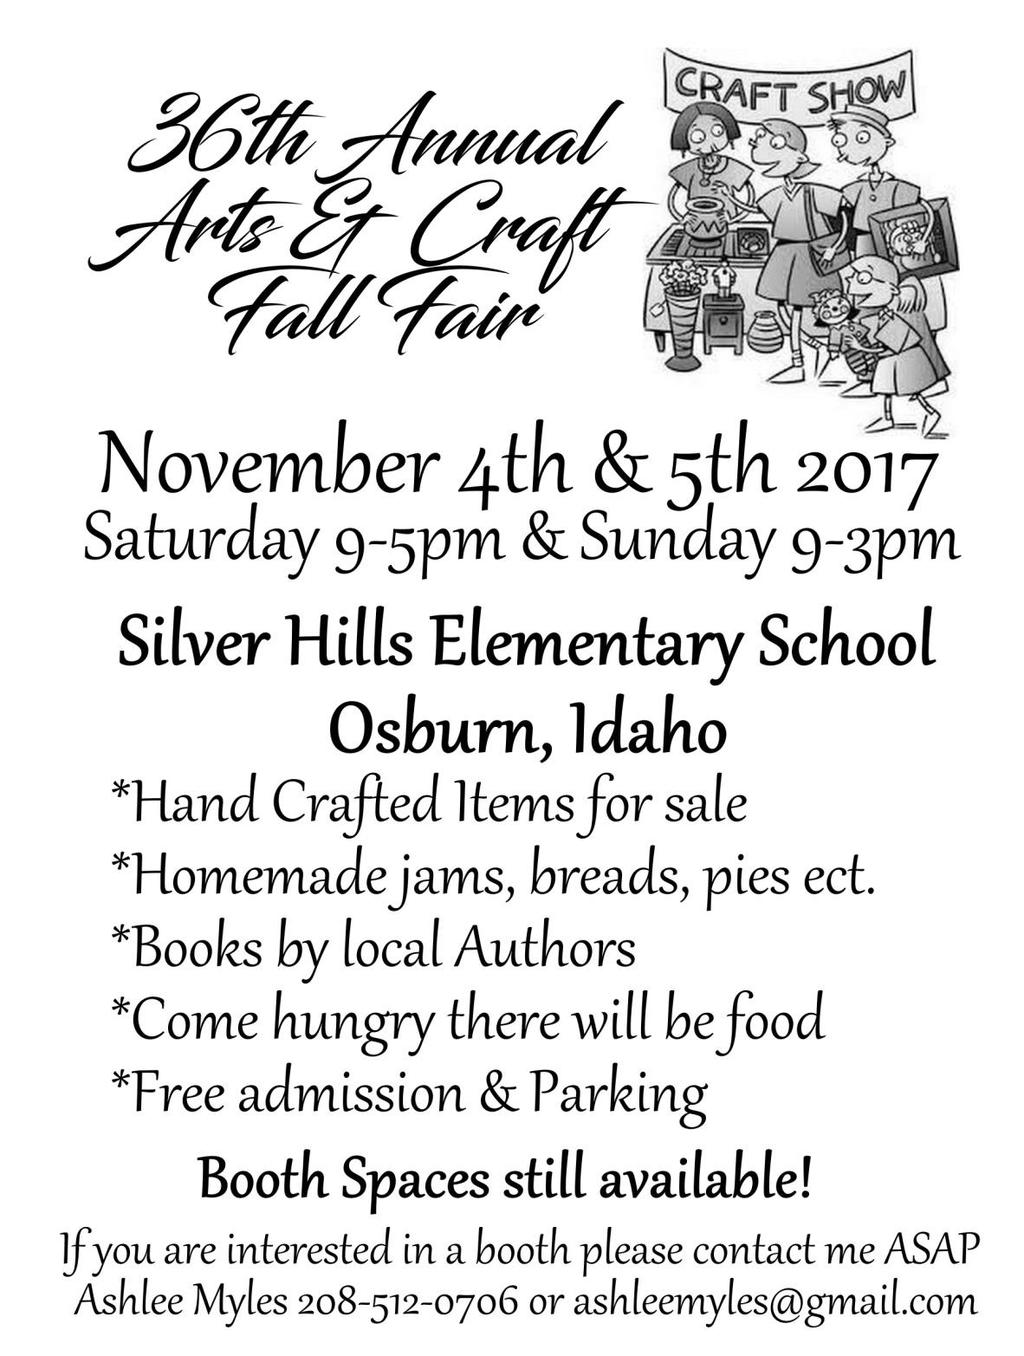 Visit our booth at the Craft Fair where you can purchase tickets for our raffle baskets.